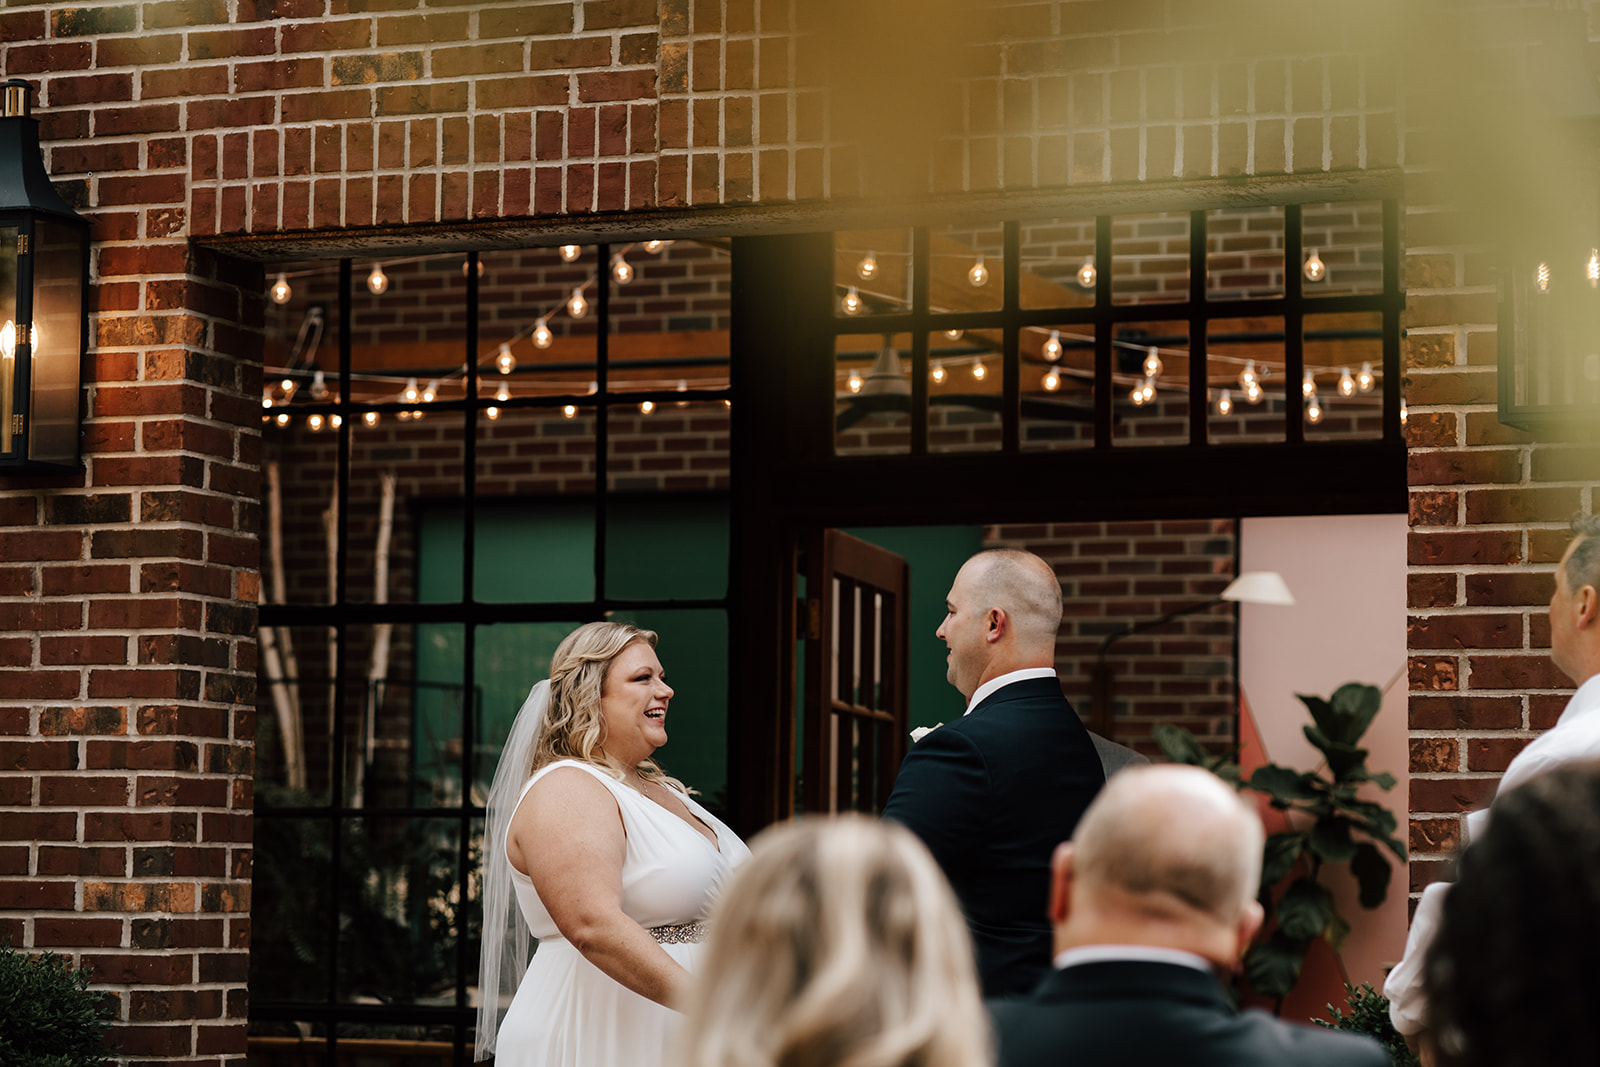 A bride and groom hold hands during their wedding ceremony in front of greenhouse with brick walls.